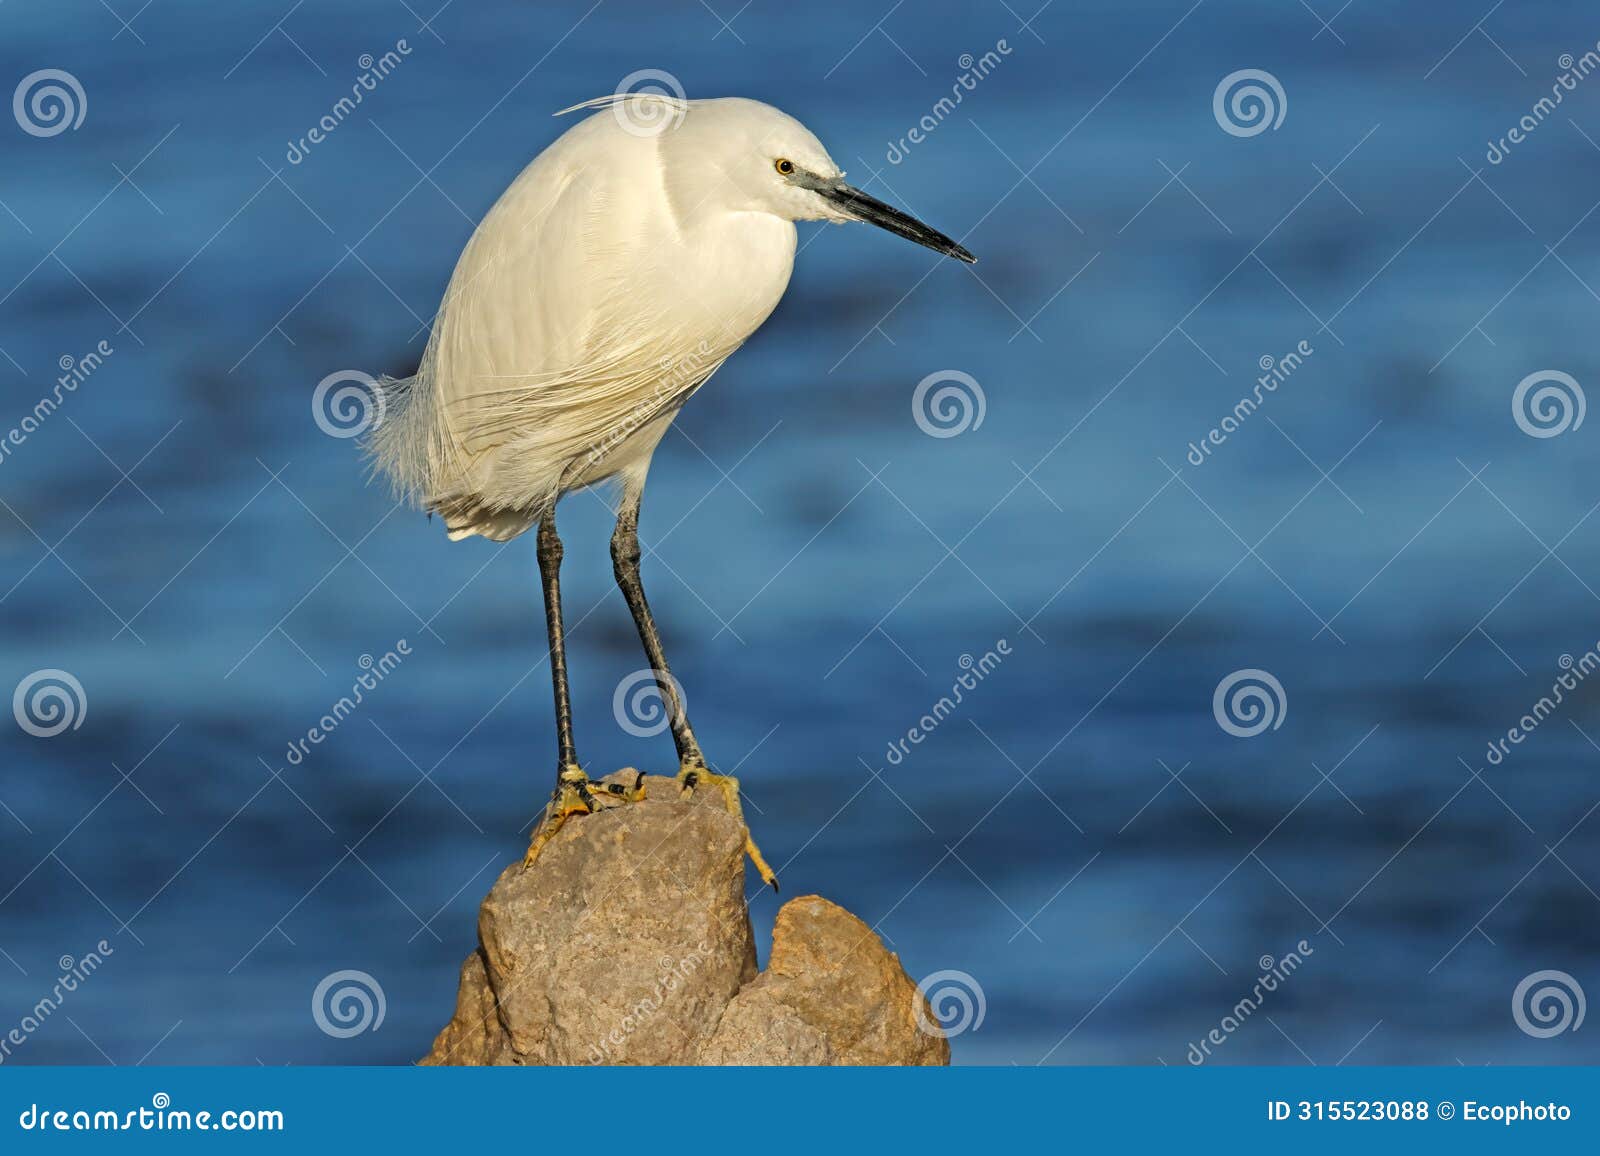 a little egret perched on a rock, south africa